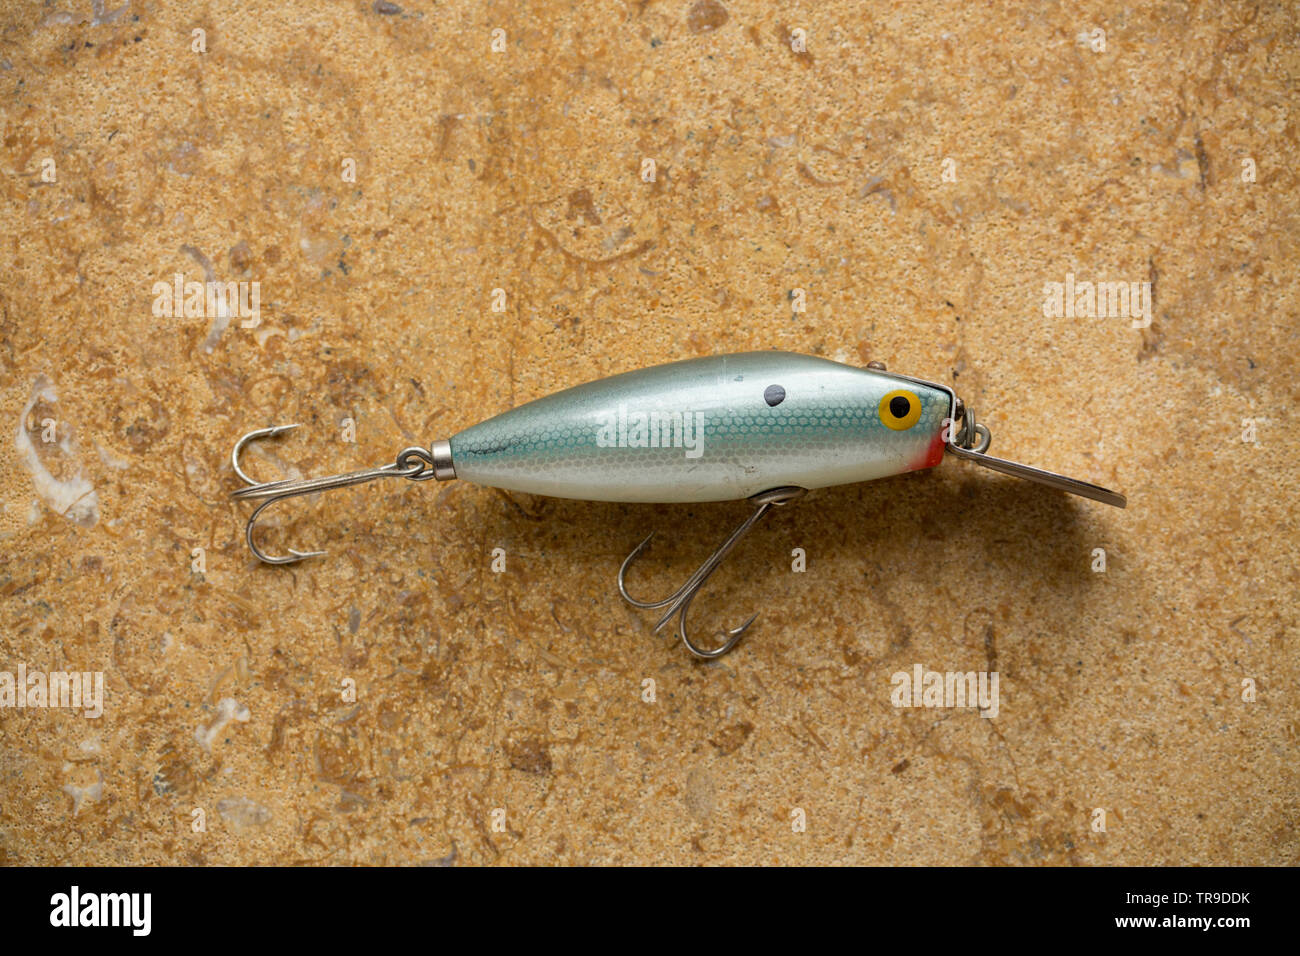 A vintage fishing lure equipped with treble hooks photographed on a stone background. These type of lures are often called plugs and are designed to c Stock Photo